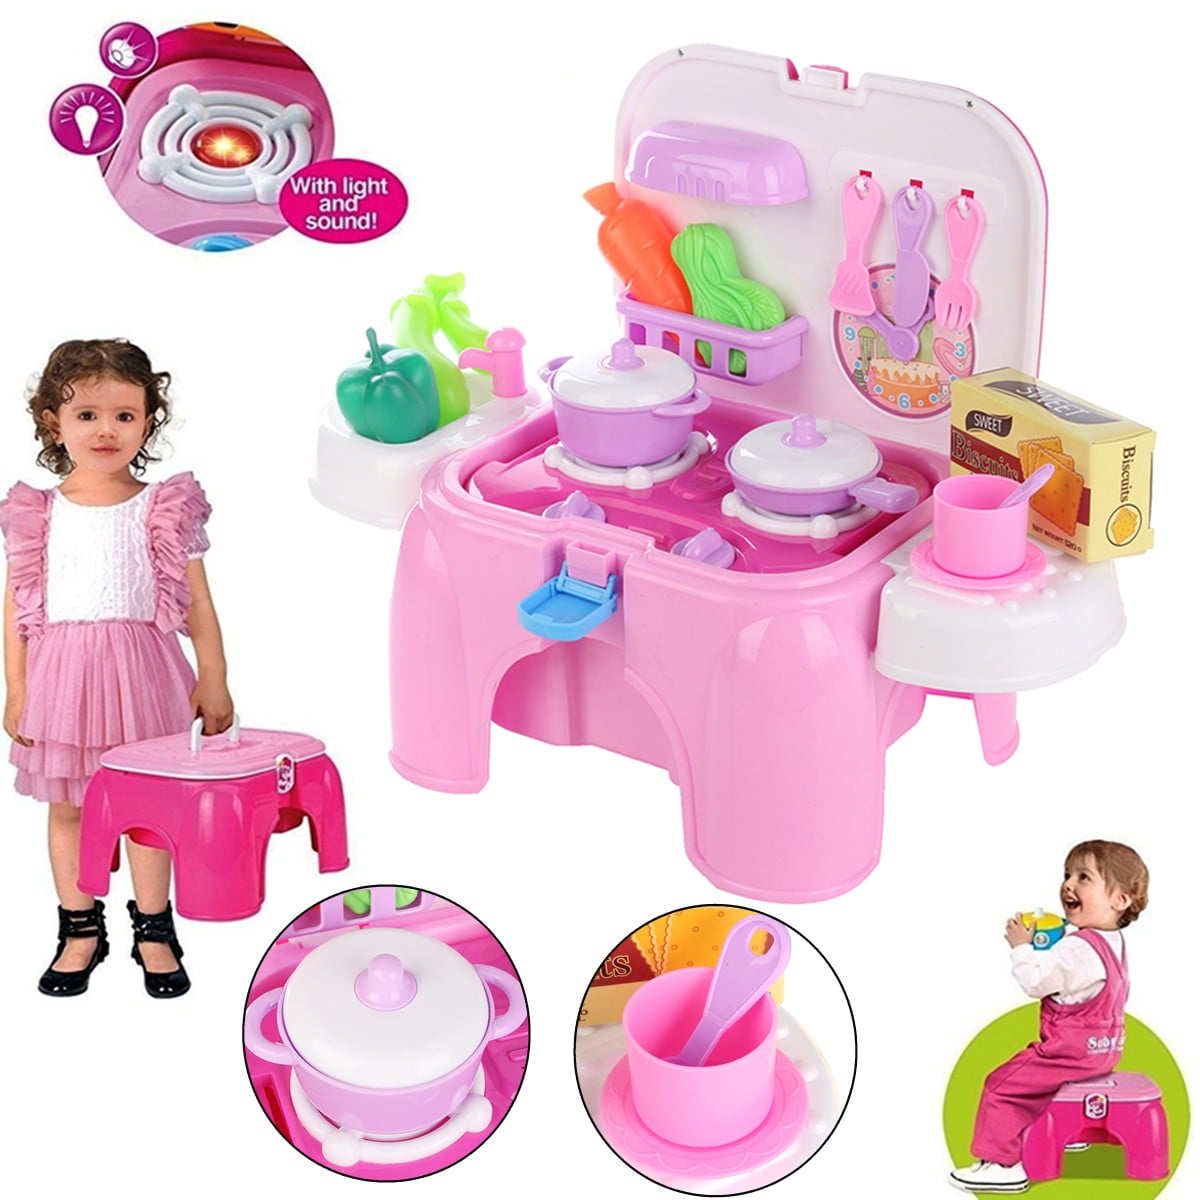 cooking playset toys